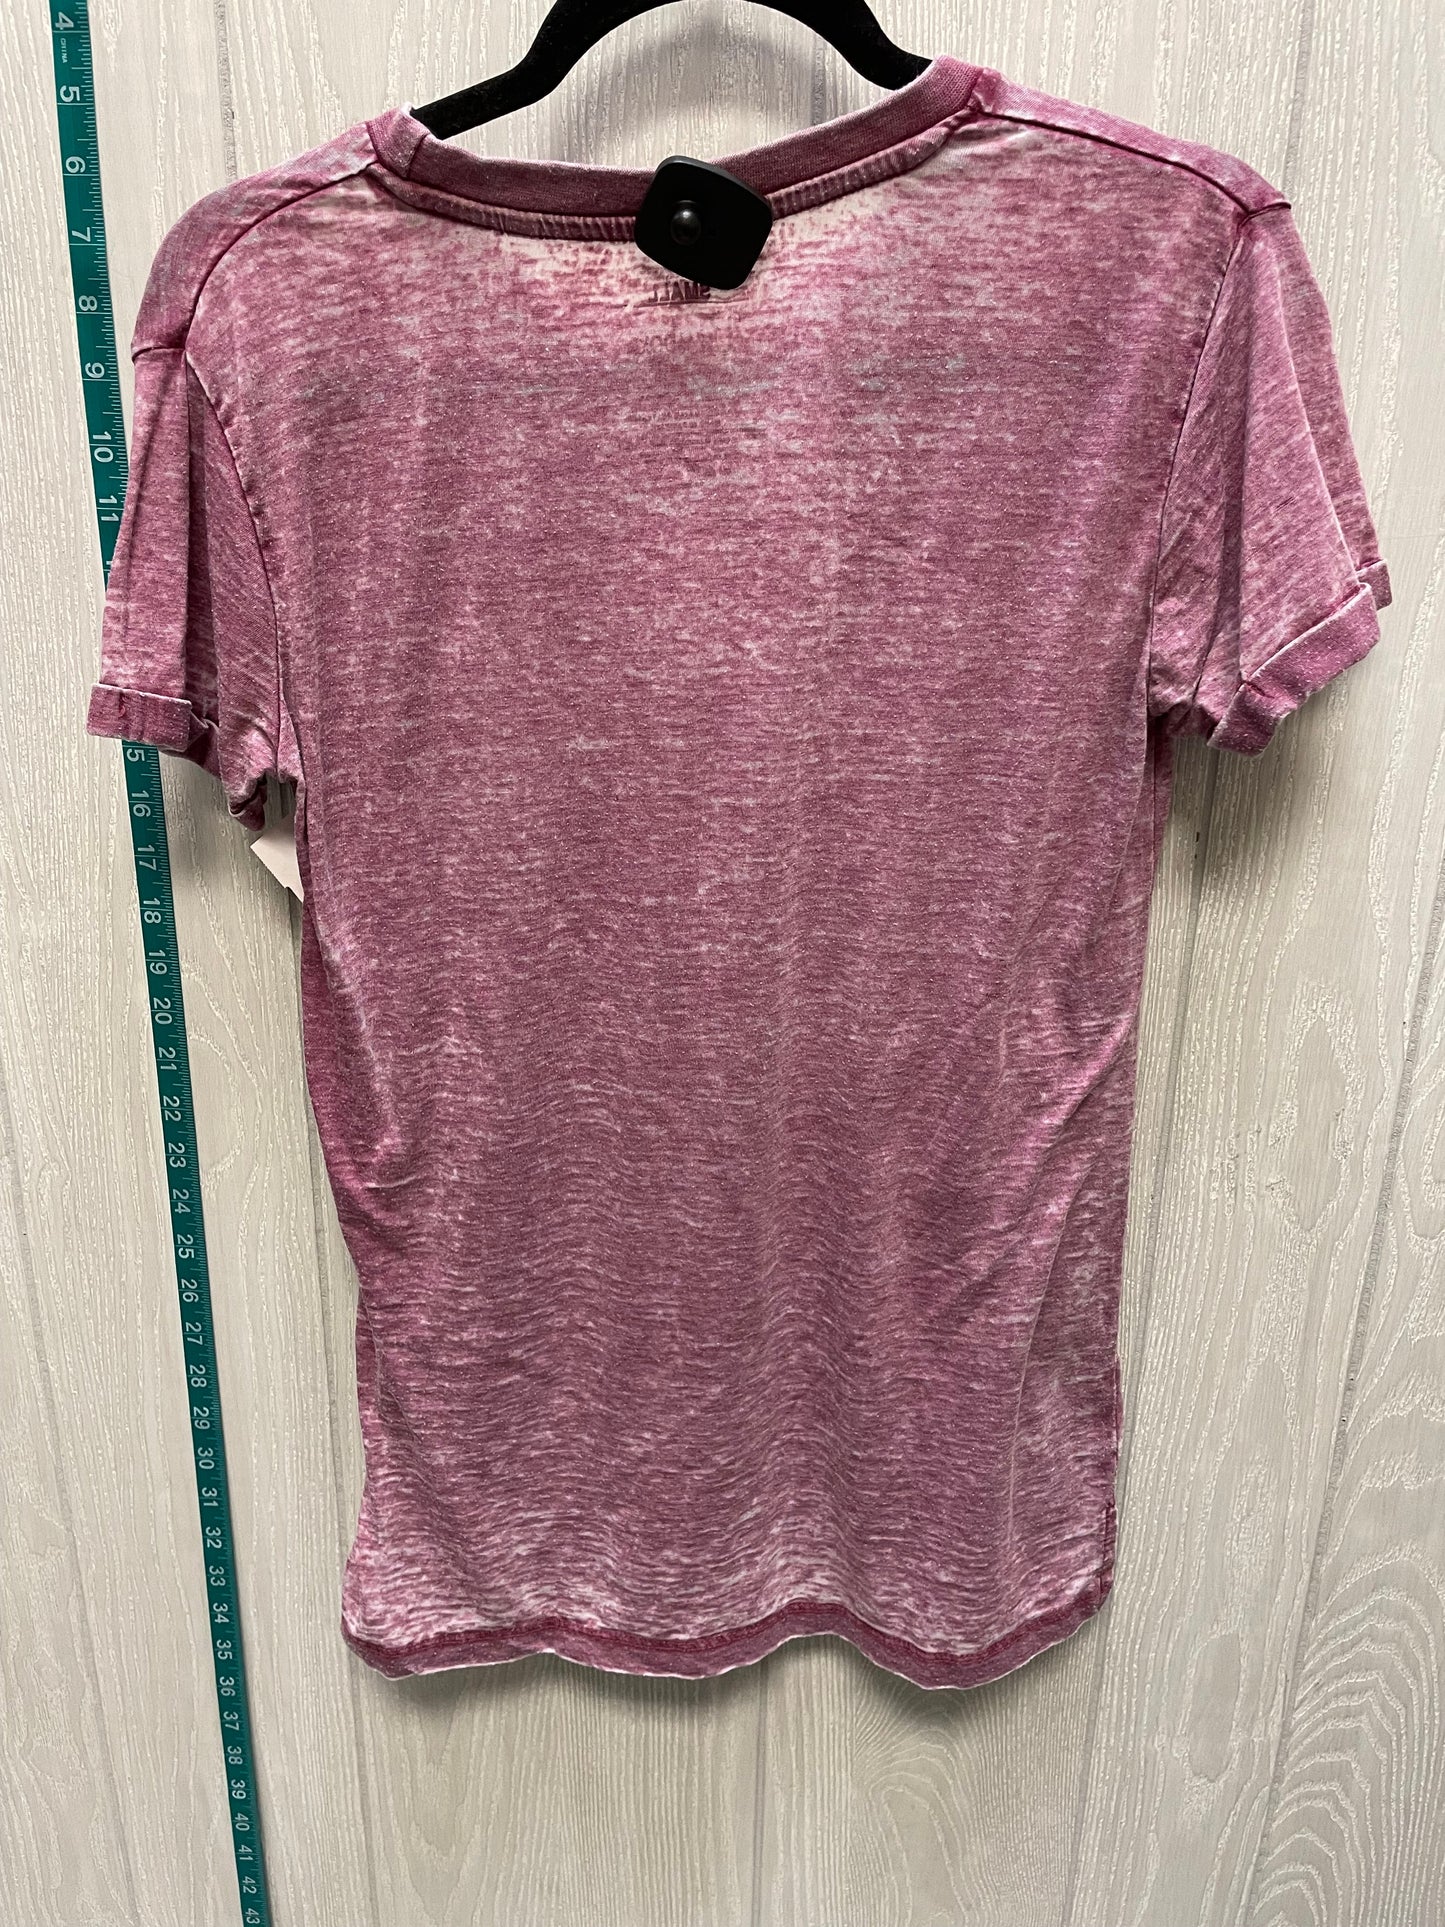 Red Top Short Sleeve Clothes Mentor, Size S